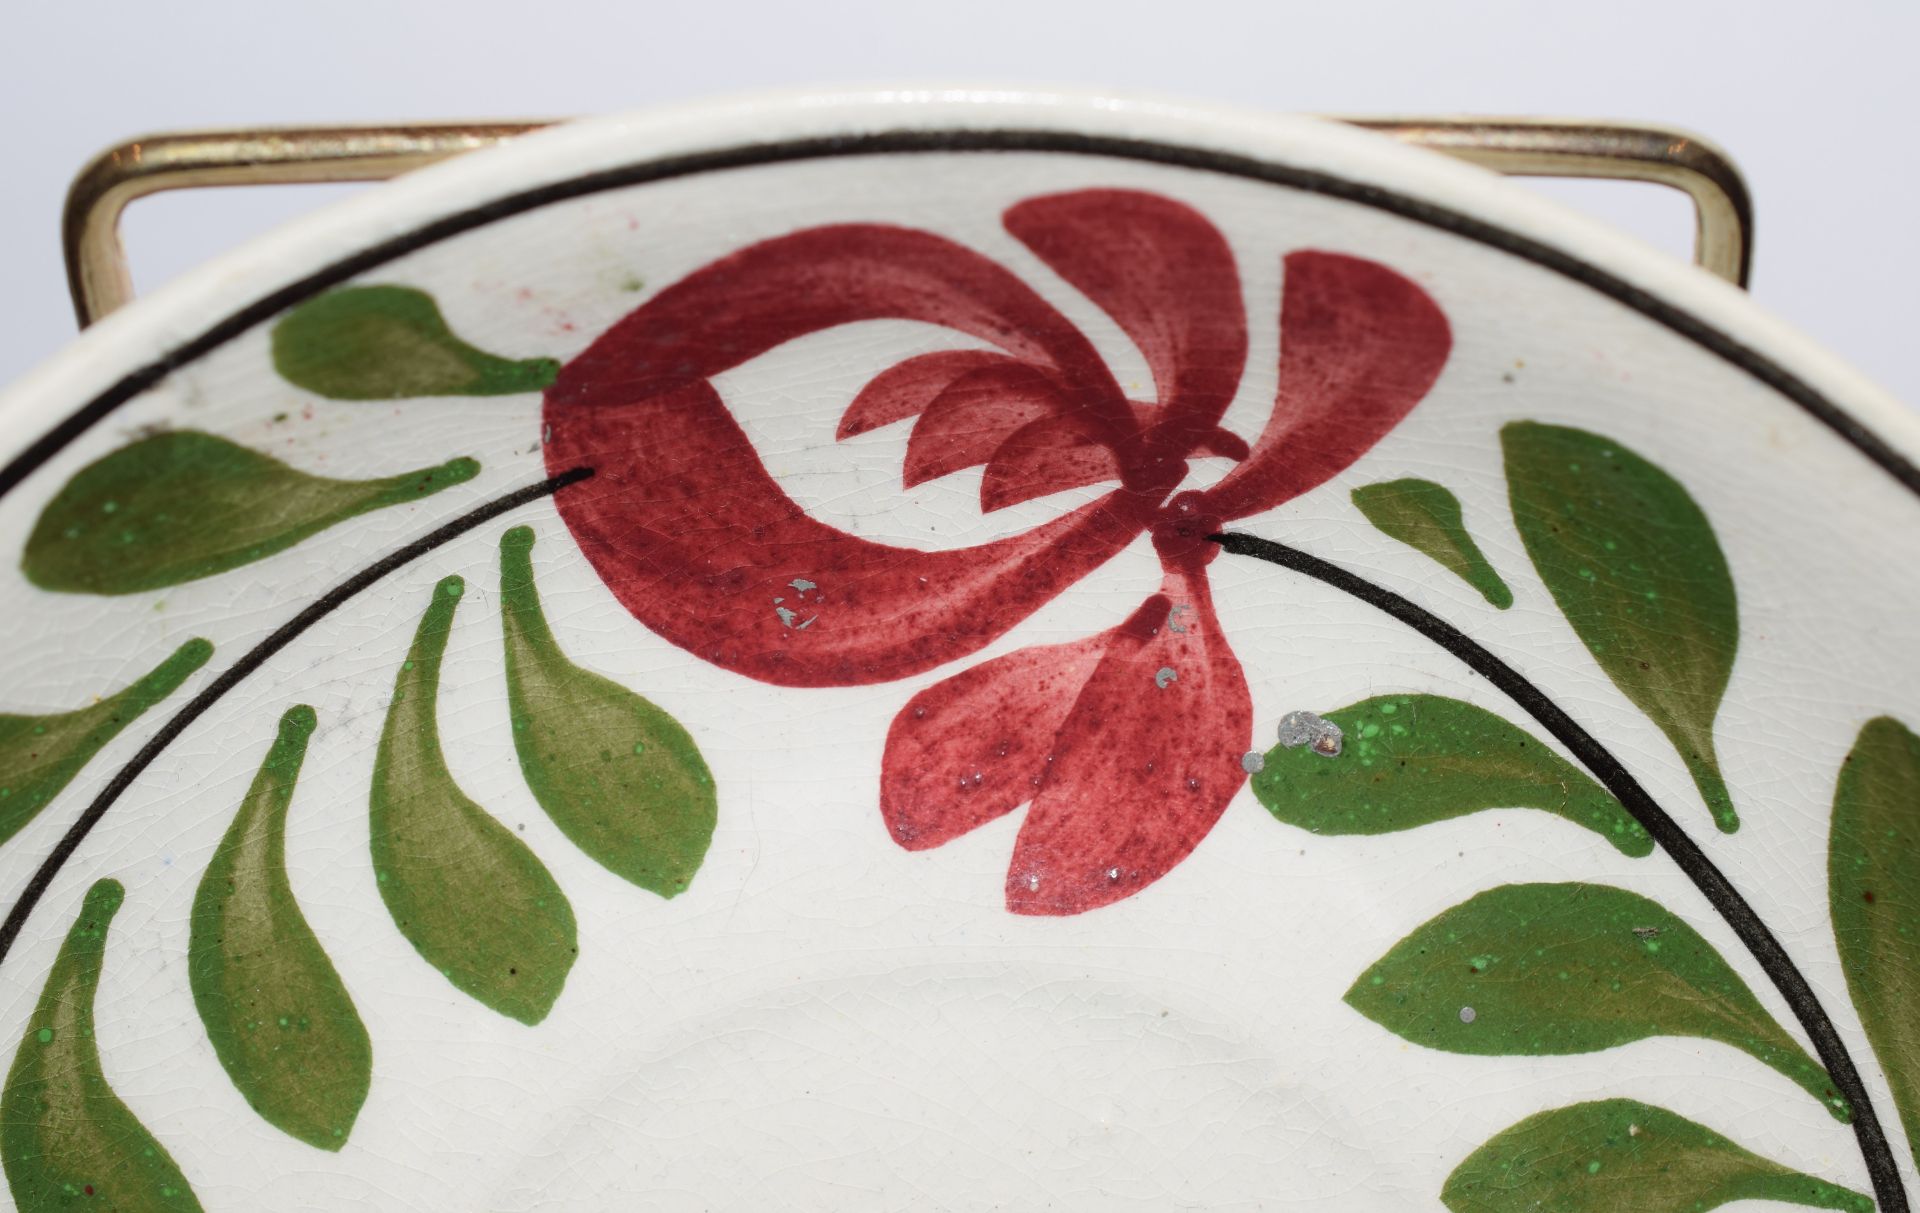 Llanelly Pottery Persian Rose Saucer - Image 2 of 3